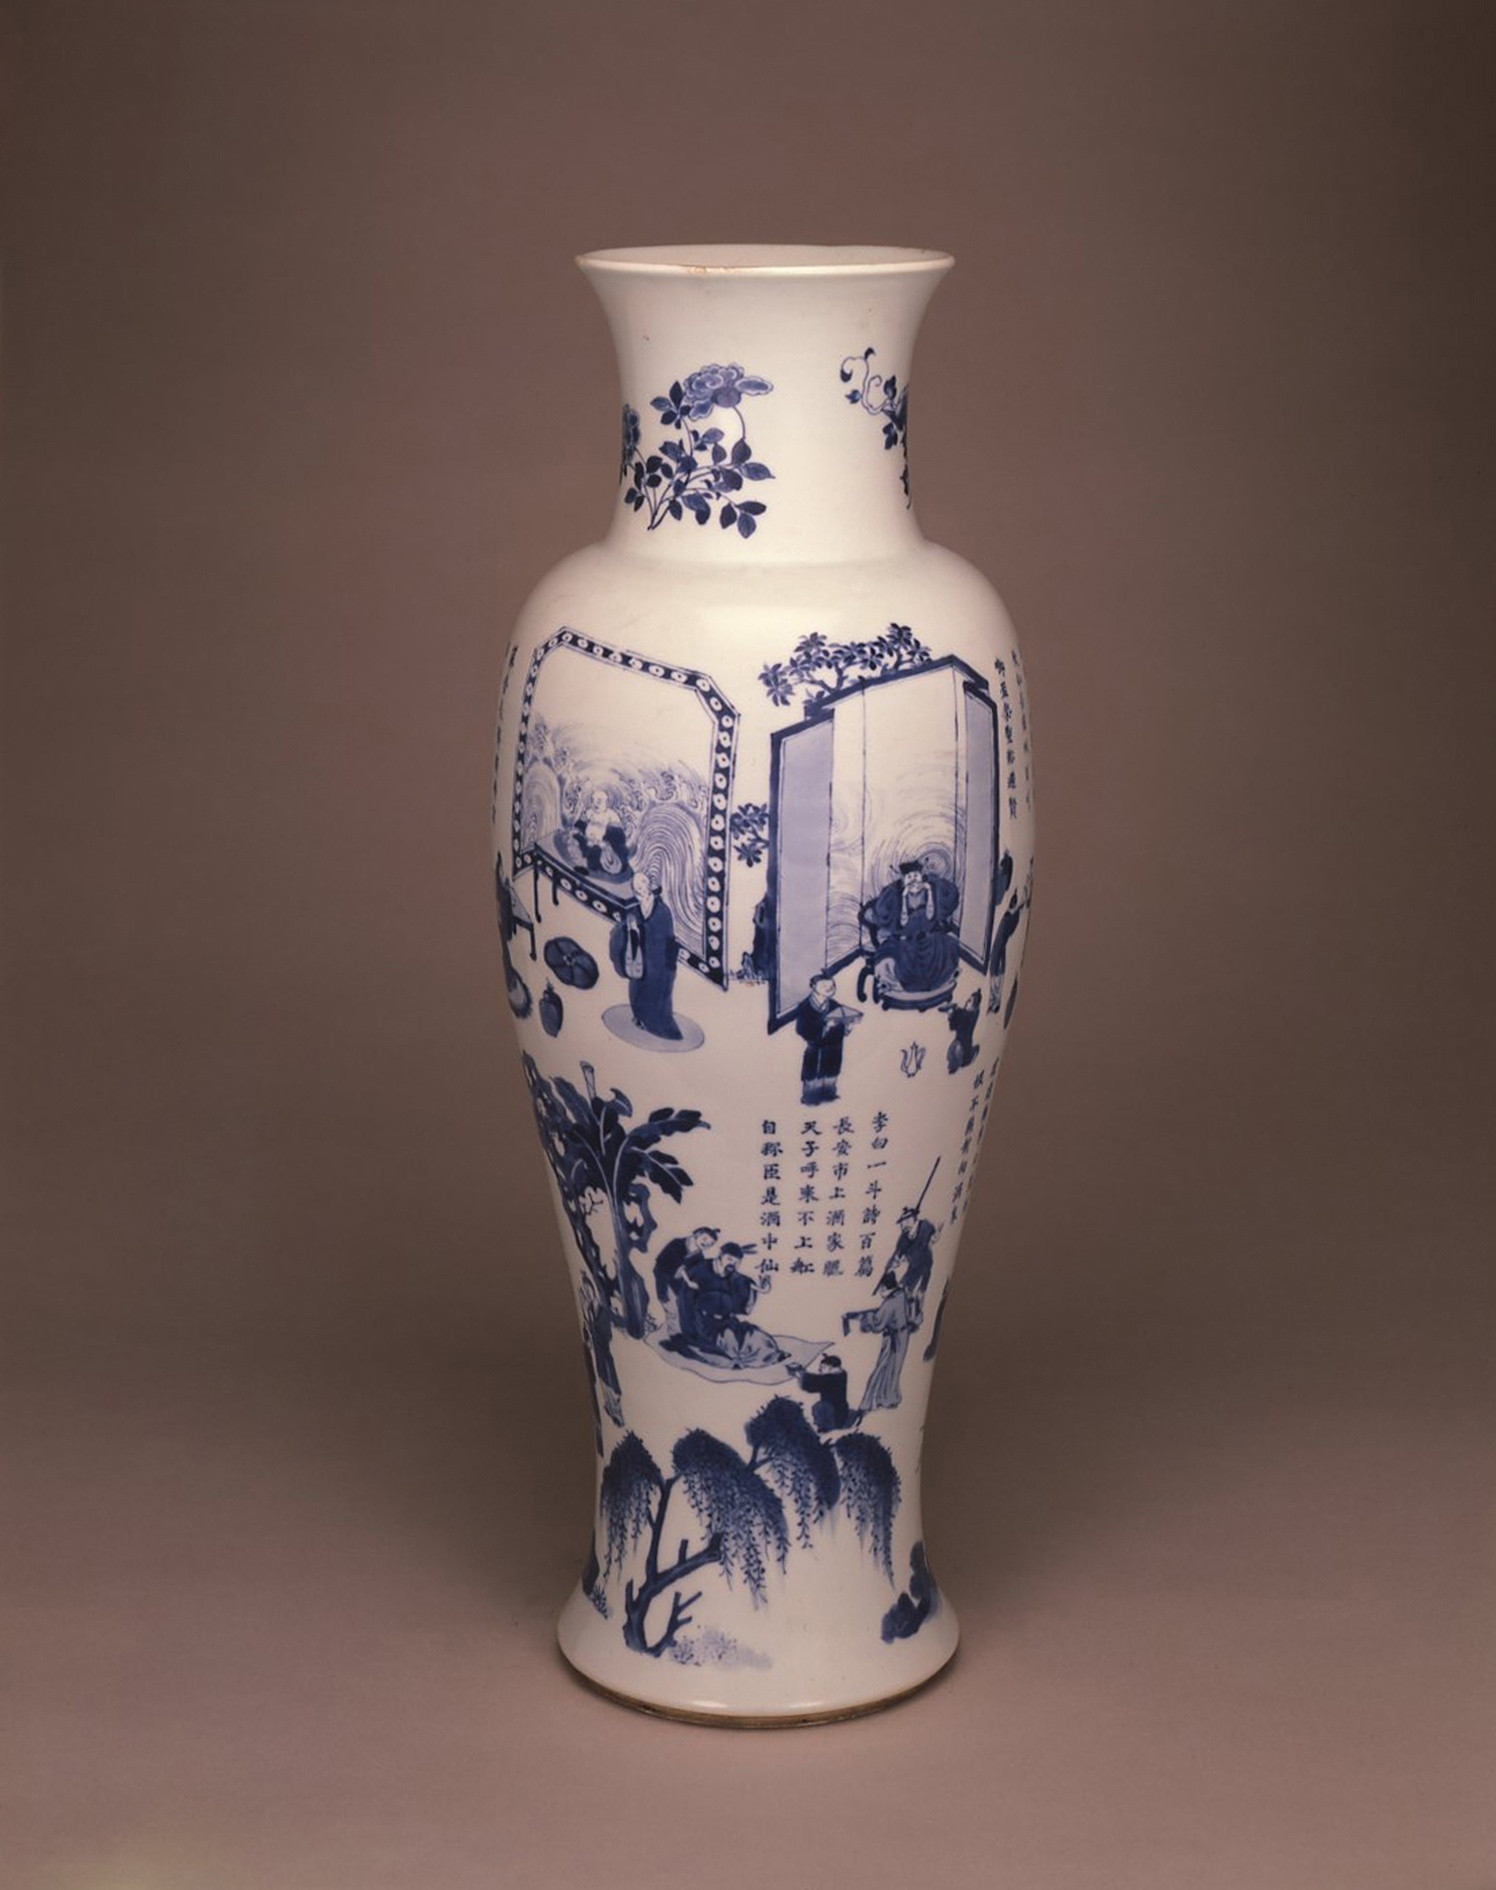 19 Lovable Cobalt Blue Vases Antique 2024 free download cobalt blue vases antique of a tall blue and white baluster vase kangxi 1662 1722 anita gray with a tall blue and white baluster vase